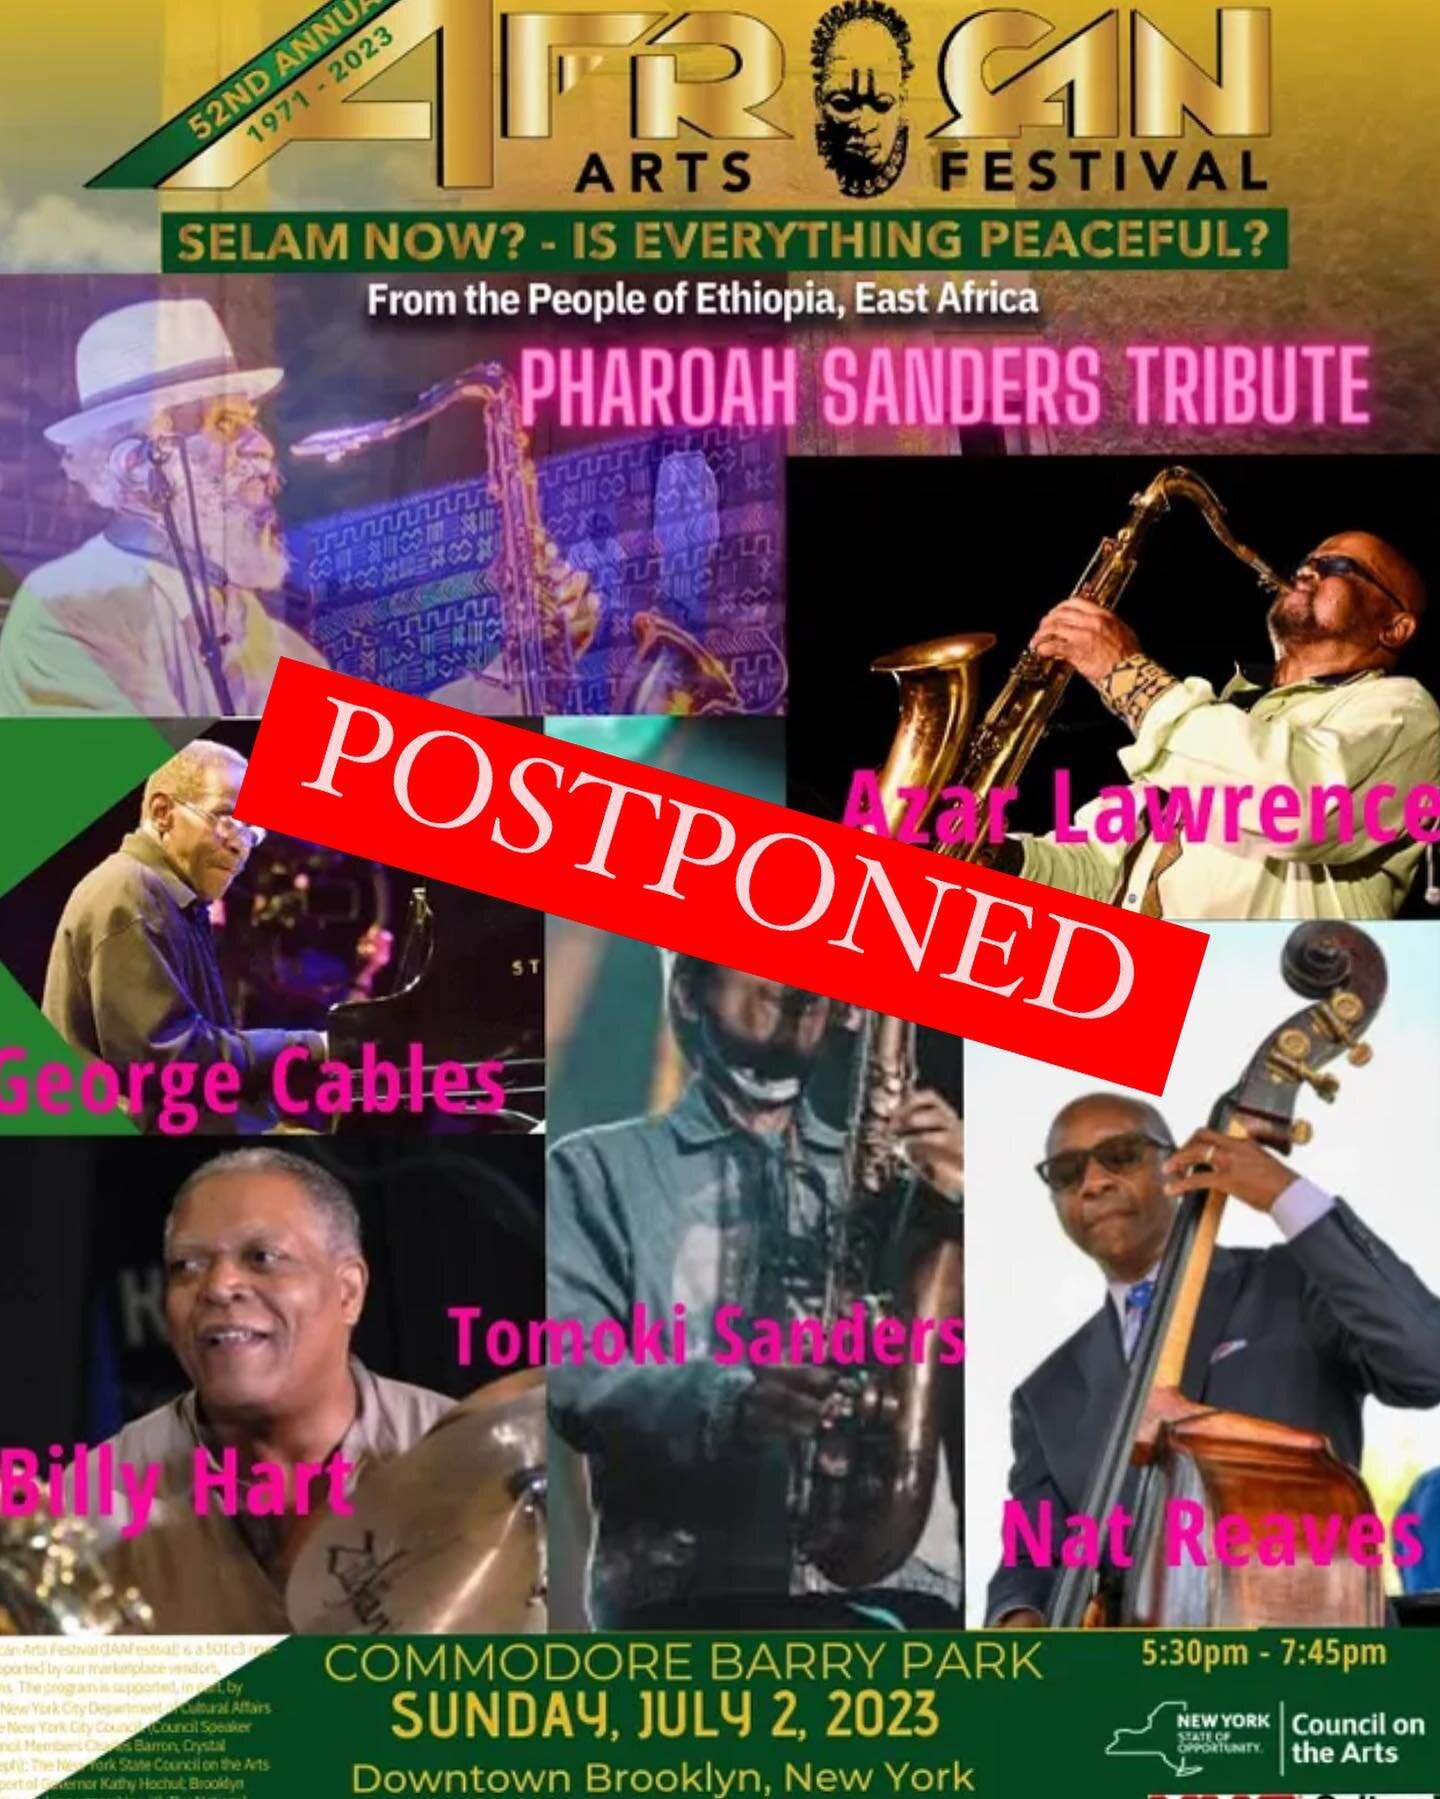 Due to potential heavy rain circumstances,
The Pharoah Sanders tribute set for the International African Arts Festival has POSTPONED to TOMORROW at 4PM❗️ See you TOMORROW Brooklyn❗️🌈